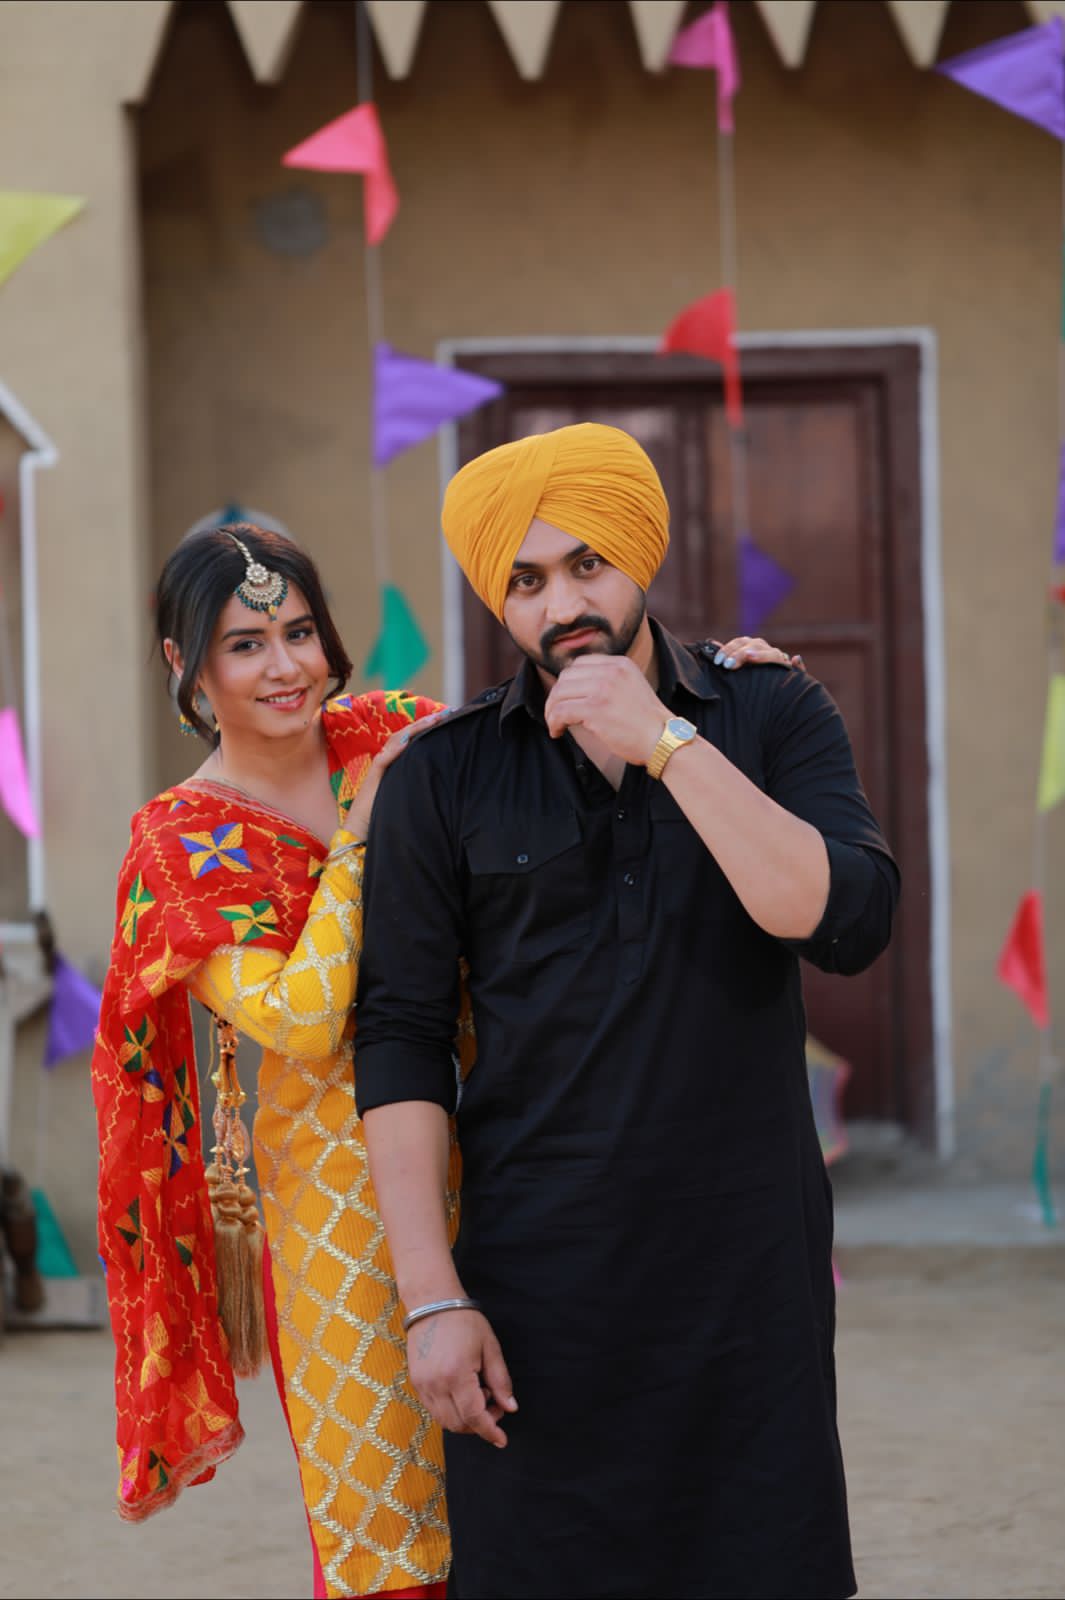 Aman Sandhu’s Latest Punjabi Song, ECG Is Out Now! She Stuns The Audiences In Dazzling Traditional Outfit Alongside Rocking Performer Inderbir Sidhu. 